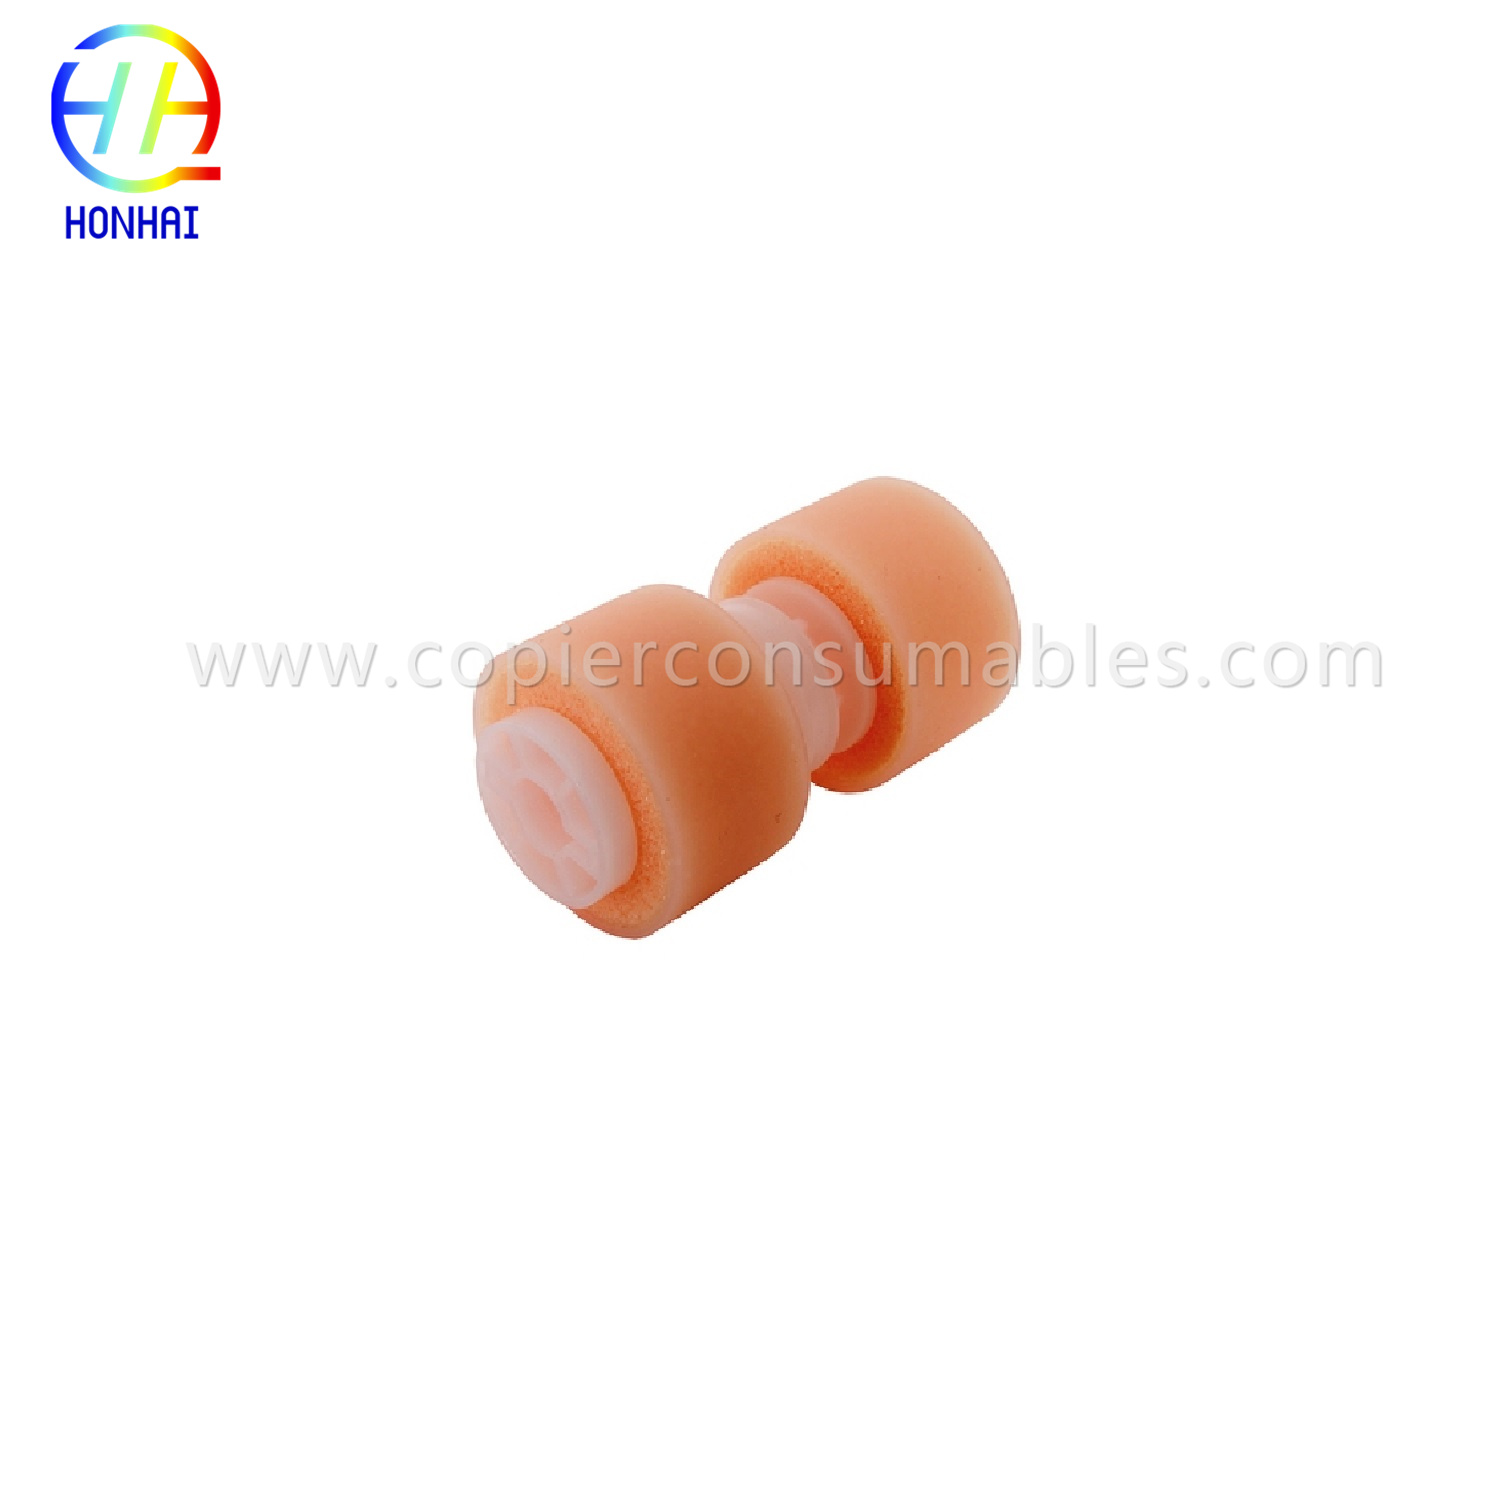 Best-Selling Rosalie Hot Rollers - Manual (Bypass) Pickup Roller HP Color Laserjet Cp2025 M476dn M375nw M451dn (RL-1802-000） – HONHAI